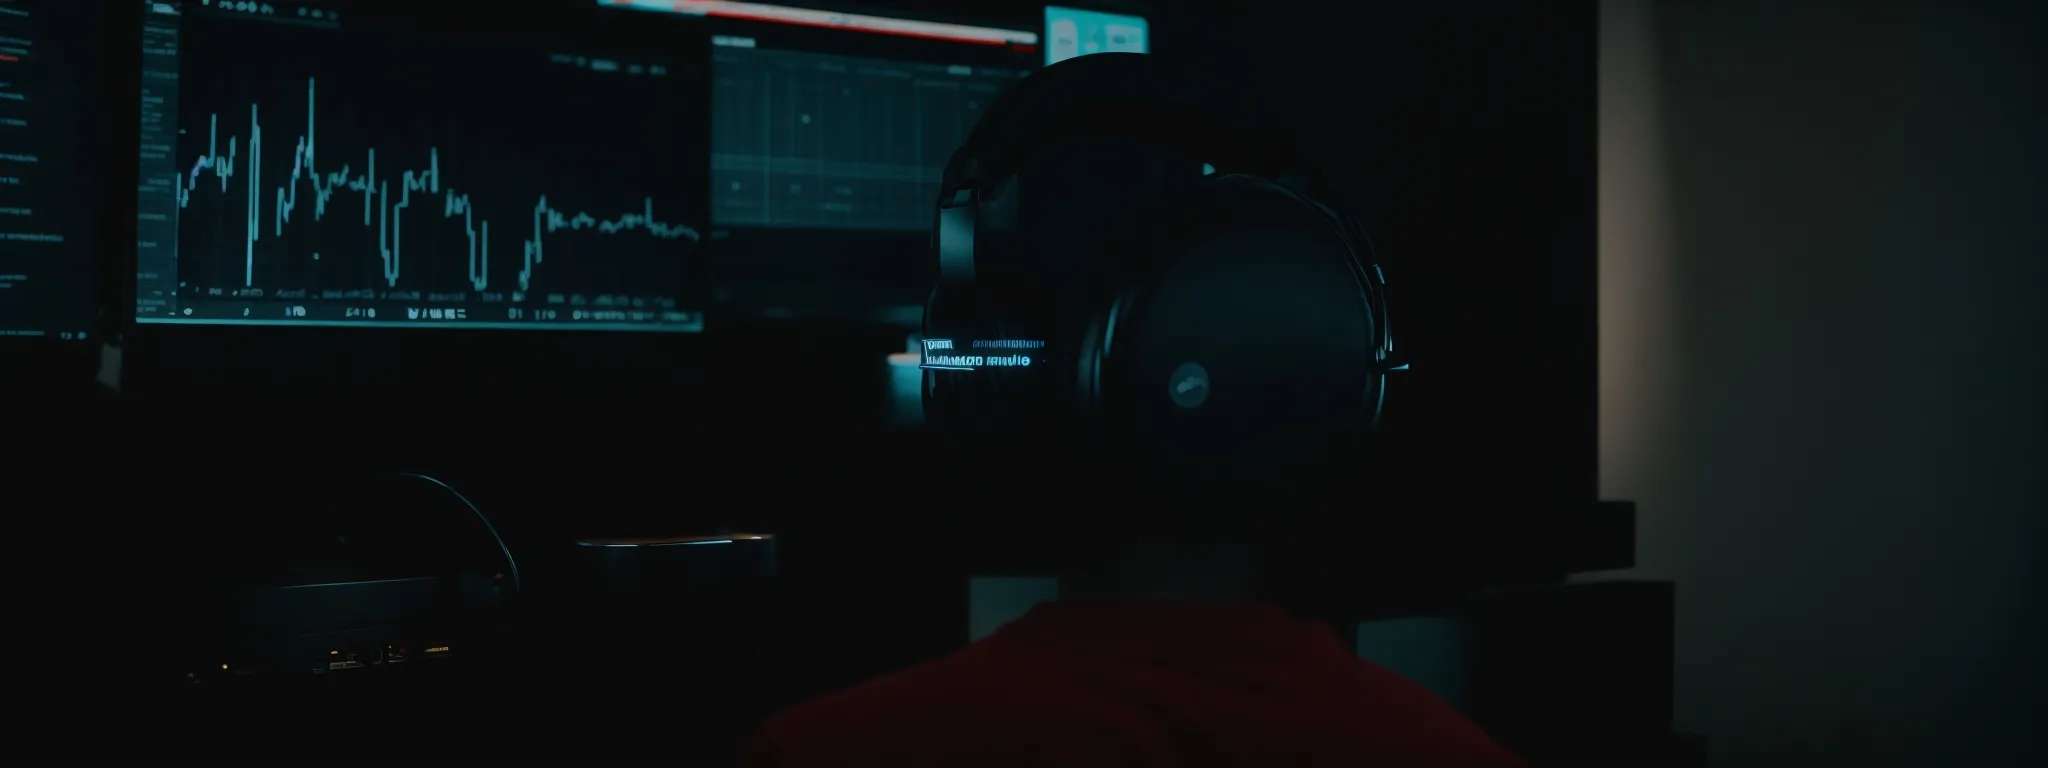 a person wearing headphones in front of a computer screen displaying waveforms, suggestive of audio editing.